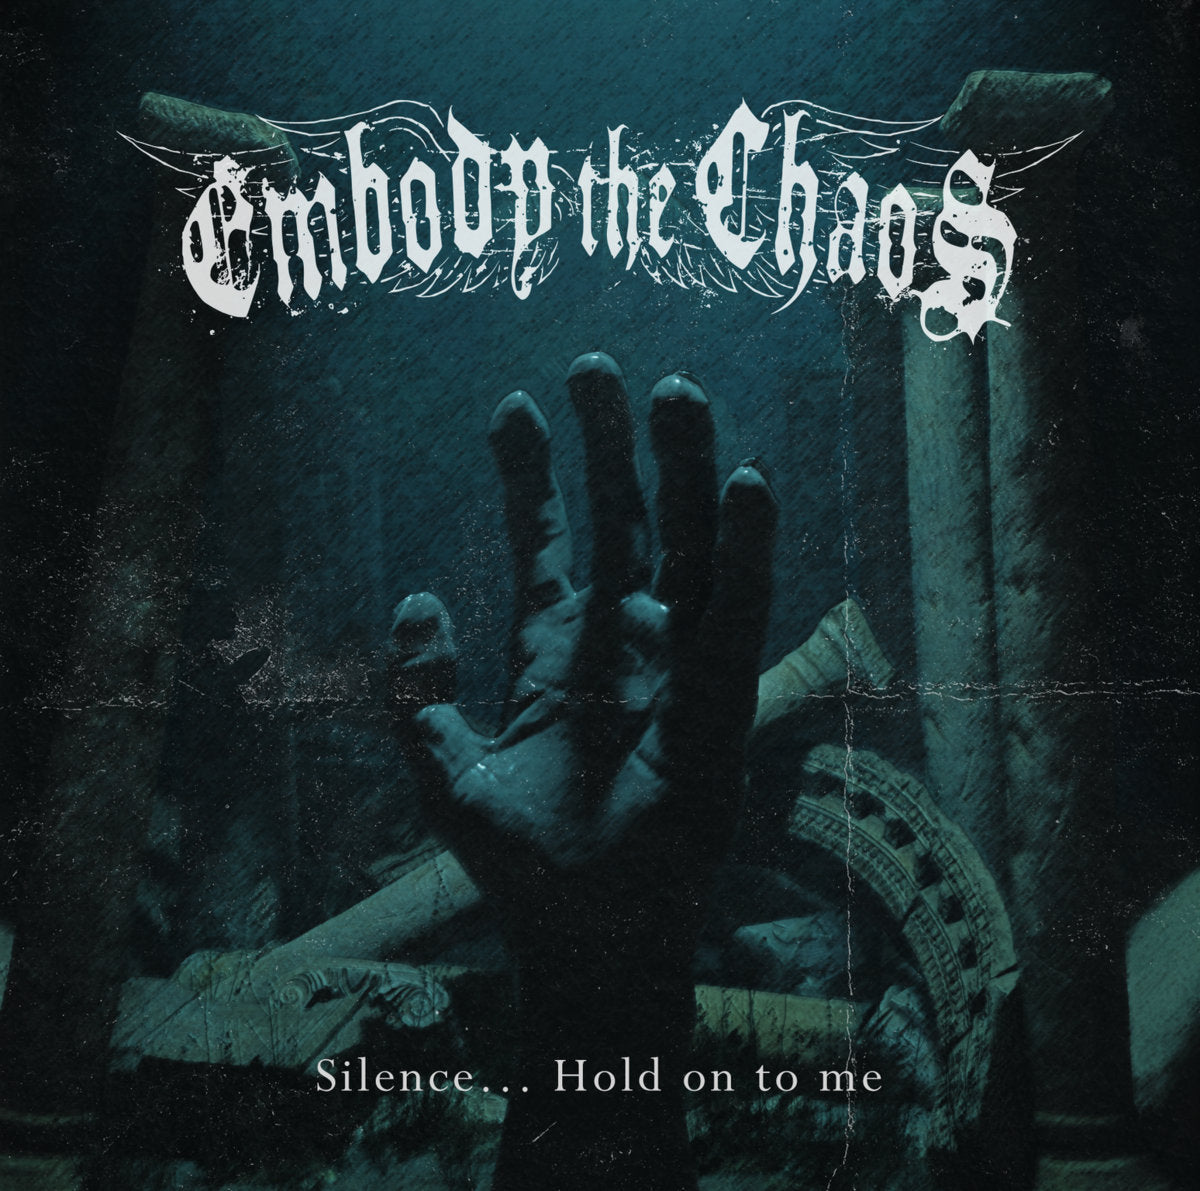 Embody The Chaos - Silence... Hold On To Me 12"